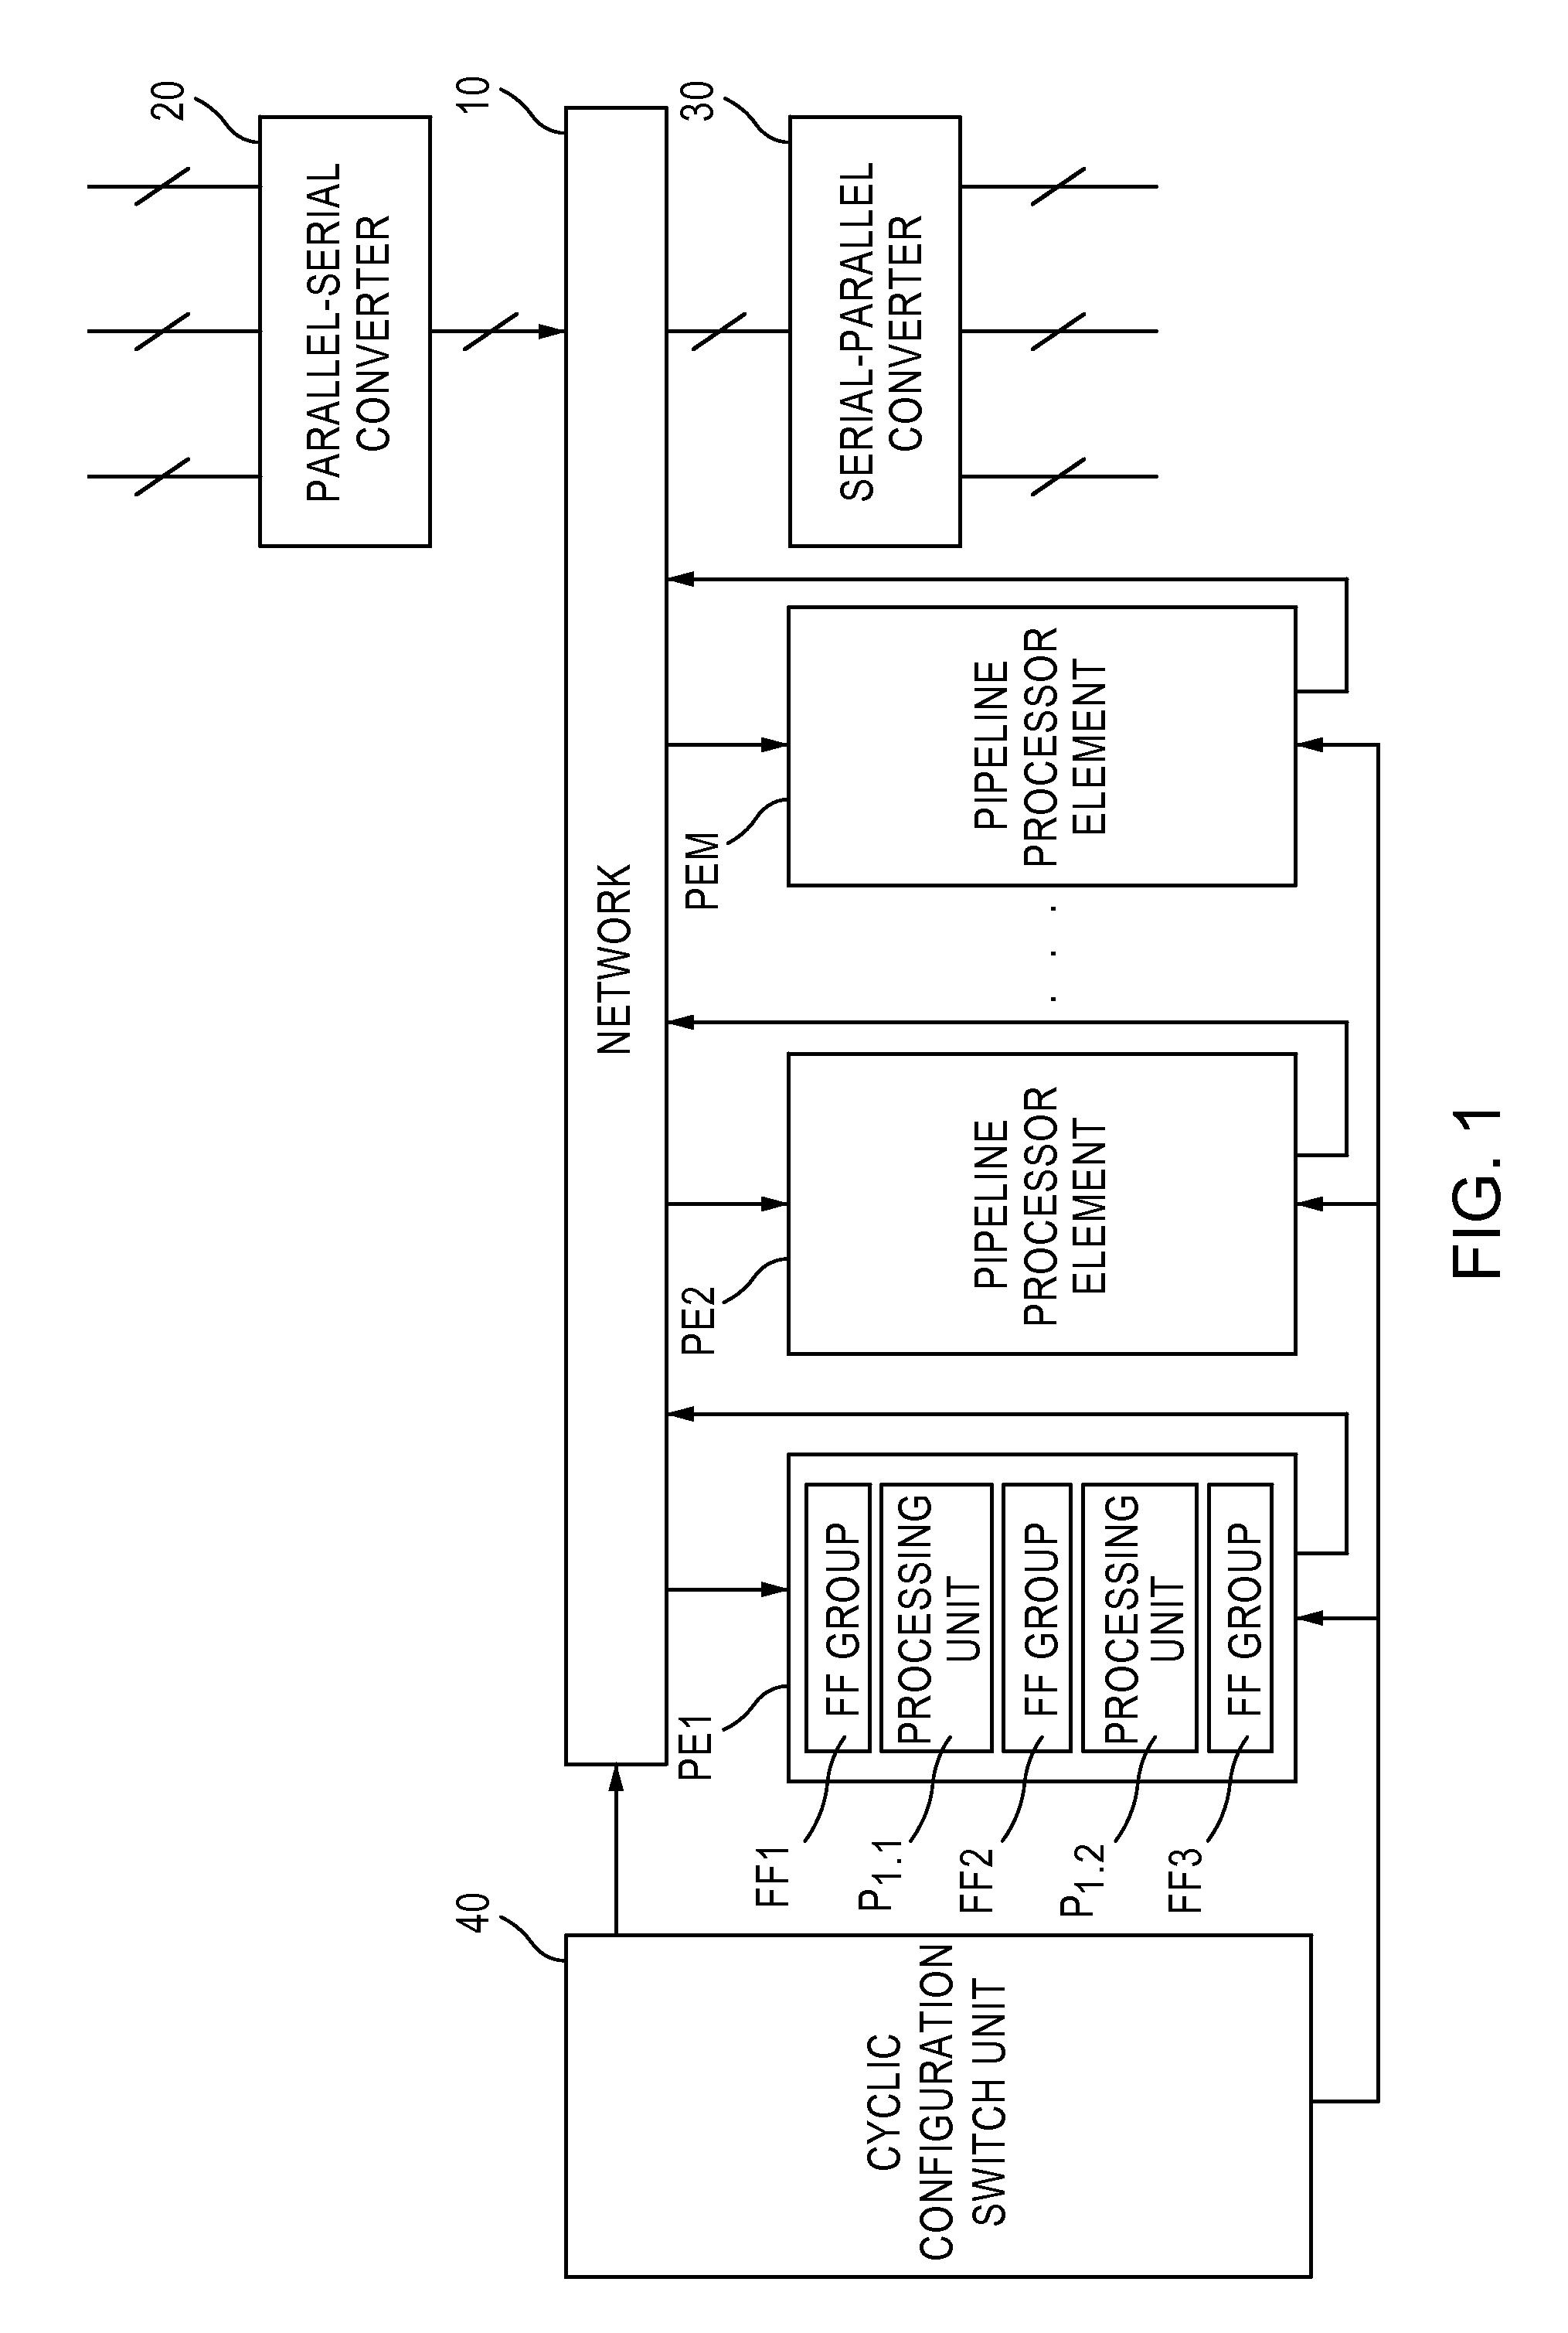 Reconfigurable circuit having a pipeline structure for carrying out time division multiple processing